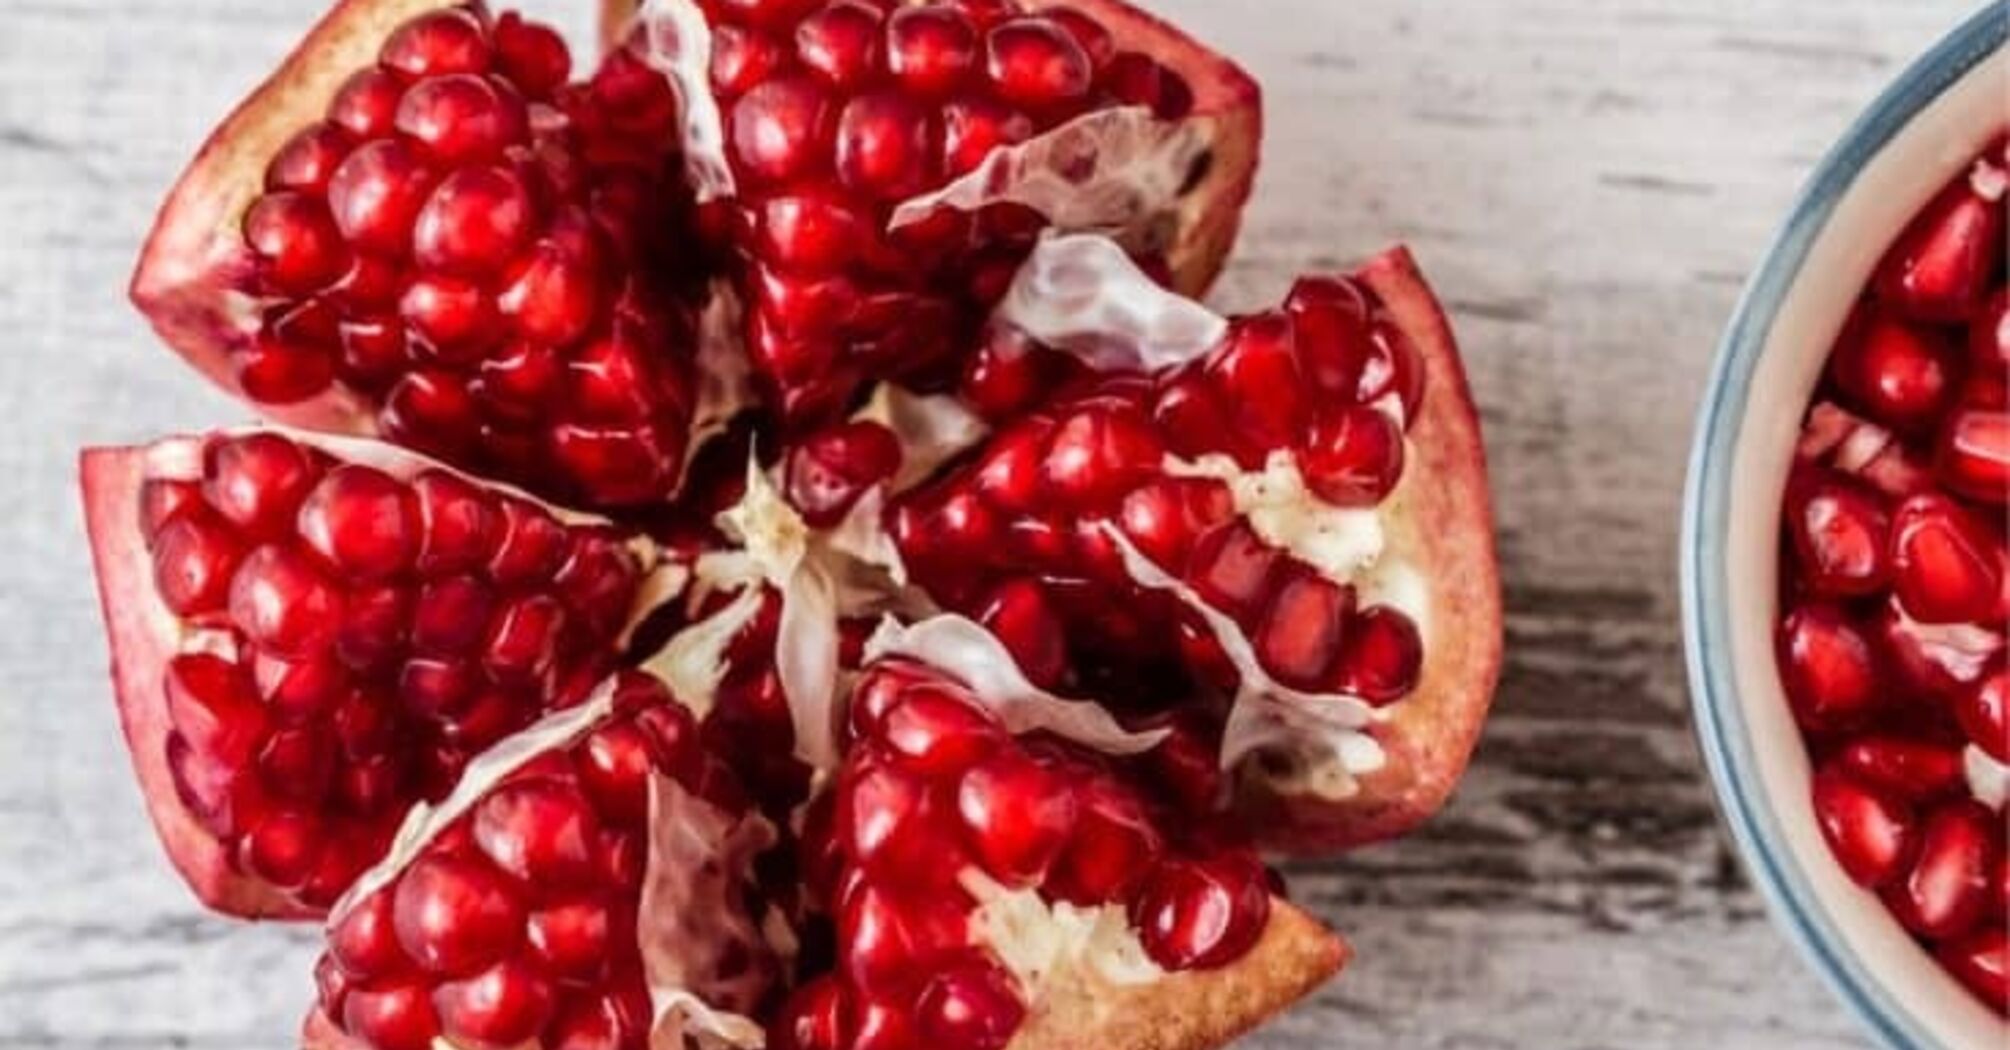 How to quickly and easily peel a pomegranate